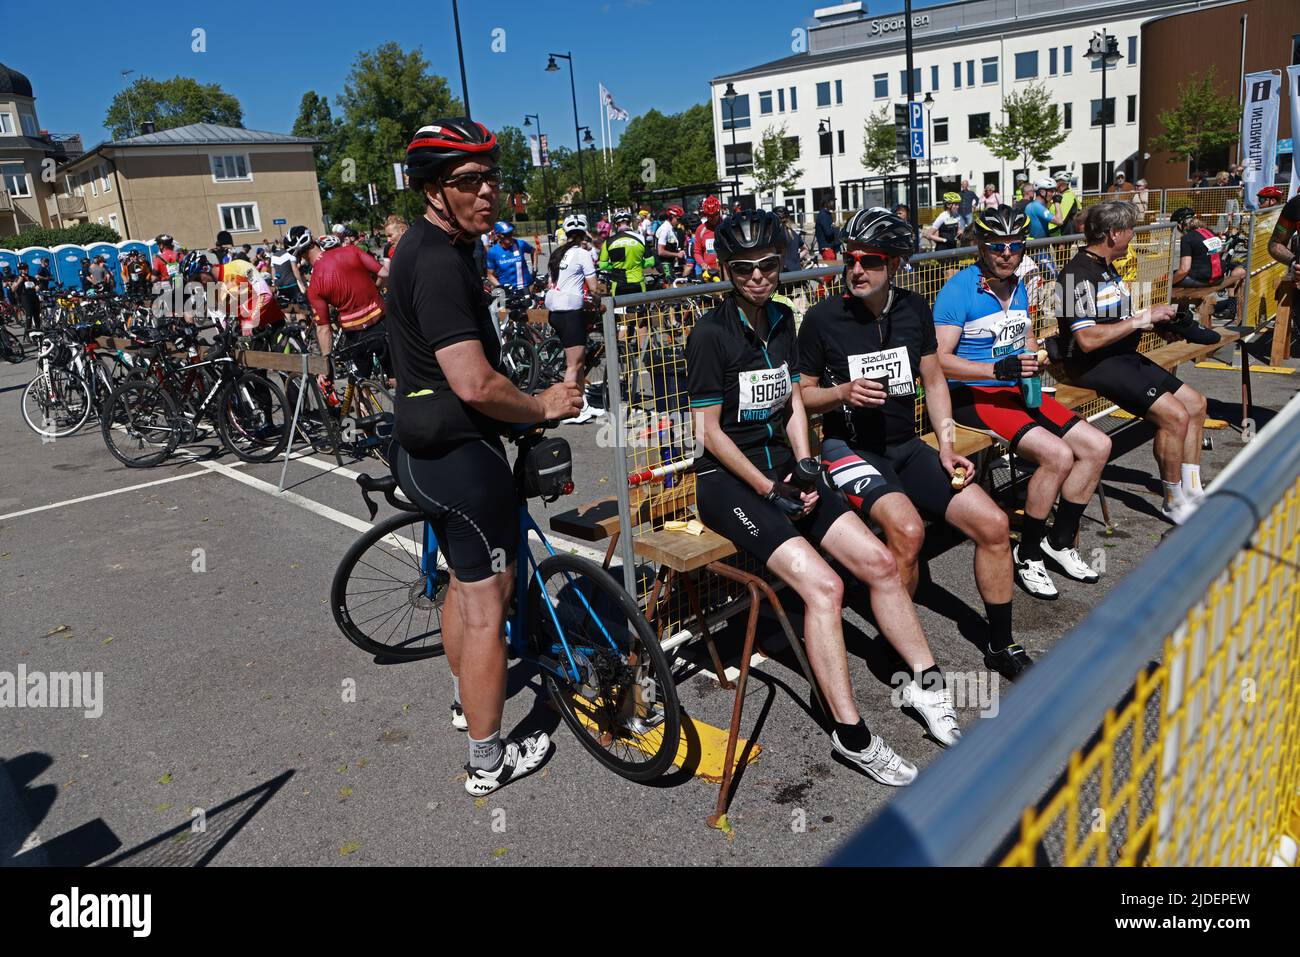 Cyclists , in Askersund, during the world's largest recreational bike ride,  Vätternrundan, Sweden, on Friday. Vätternrundan is one of the world's  largest exercise races by bicycle and this year 16,000 cyclists have